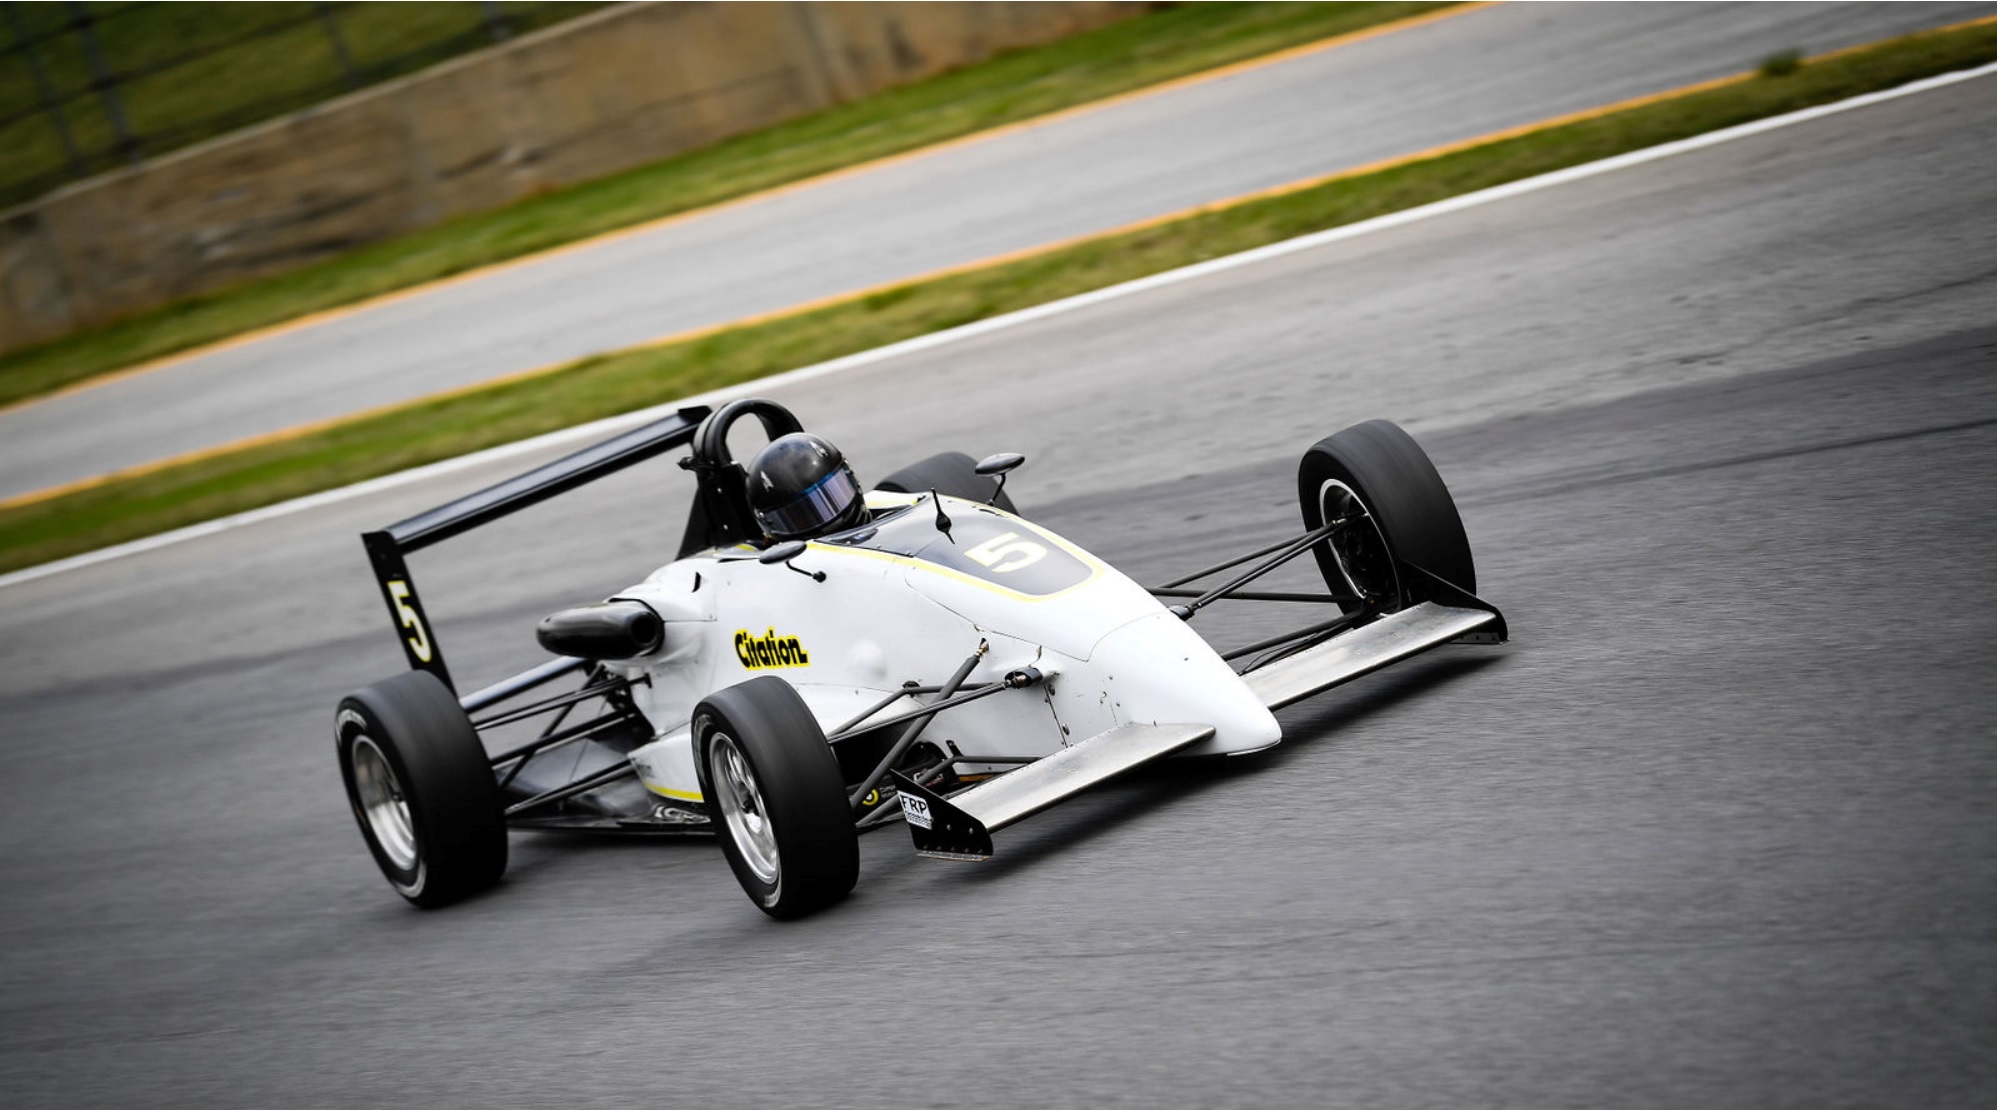 <br><b>The Car details and Owner history are as follow: </b><br><b>Car built and co-designed by Brandon Dixon.</b> <br>Frame is an updated design for 2015 by Dixon. <br>Car has won 3 FRP F2000 Pro Series championships (2017,2019, 2020). 